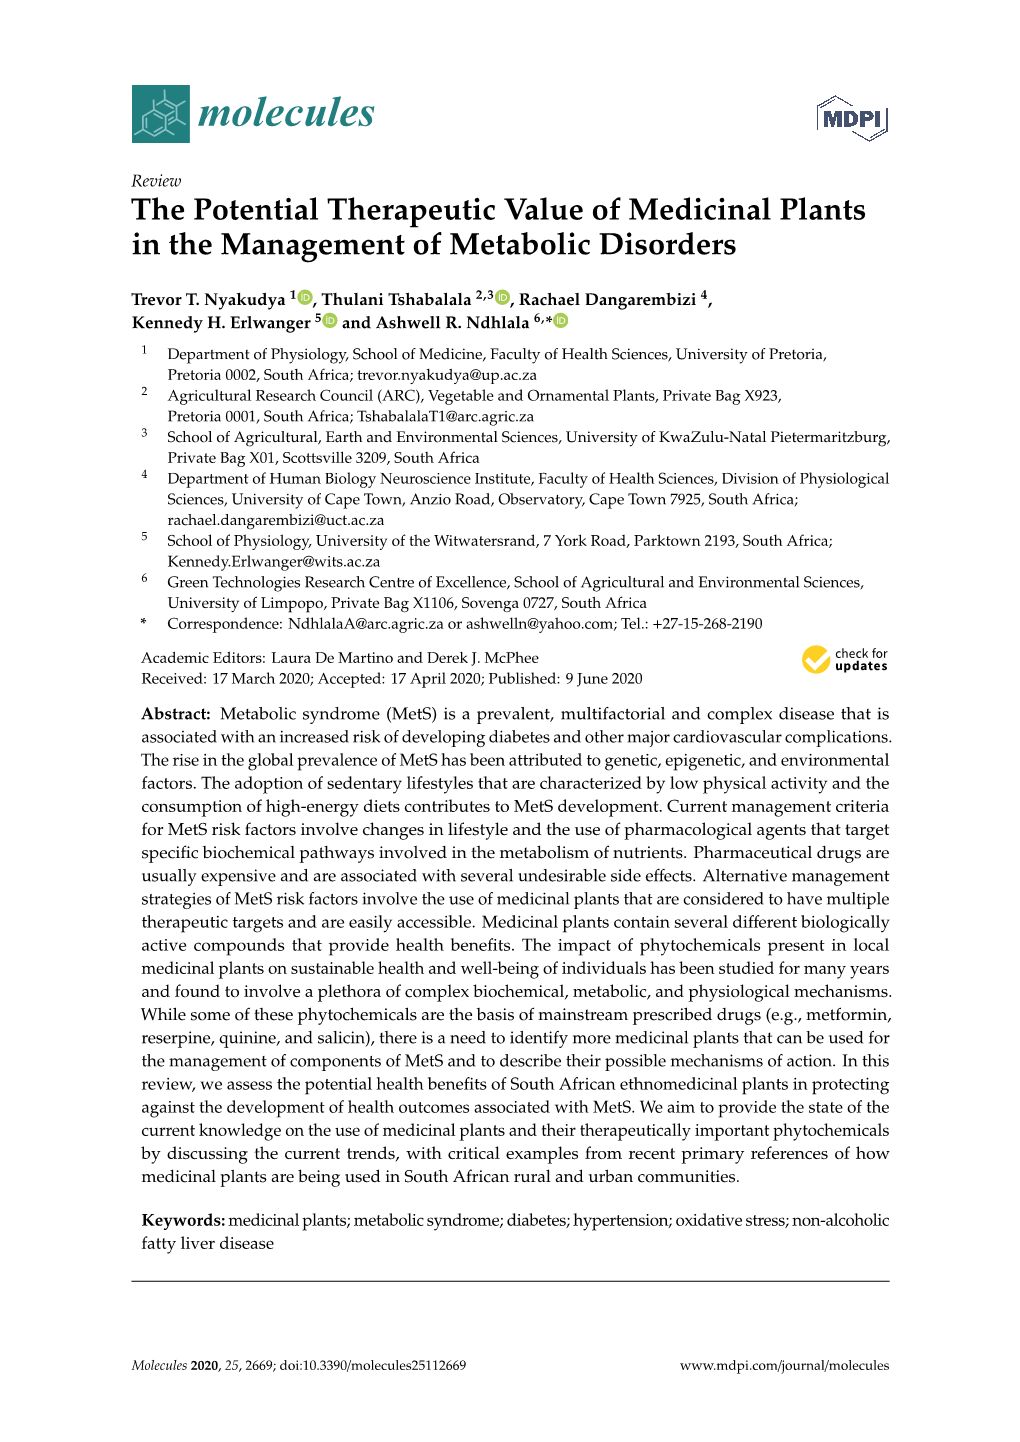 The Potential Therapeutic Value of Medicinal Plants in the Management of Metabolic Disorders